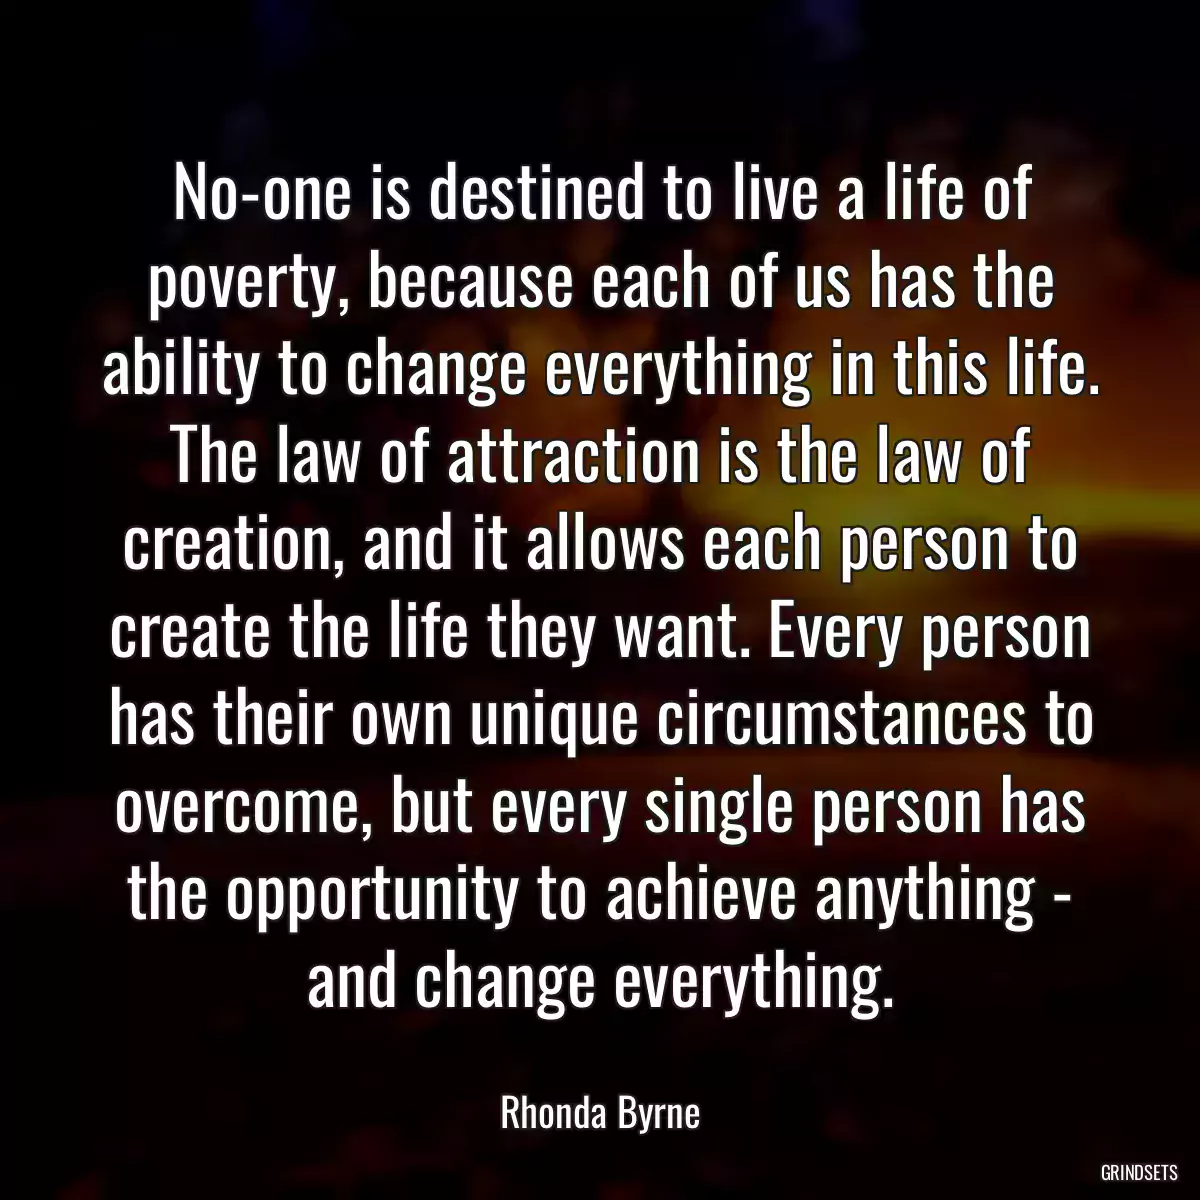 No-one is destined to live a life of poverty, because each of us has the ability to change everything in this life. The law of attraction is the law of creation, and it allows each person to create the life they want. Every person has their own unique circumstances to overcome, but every single person has the opportunity to achieve anything - and change everything.